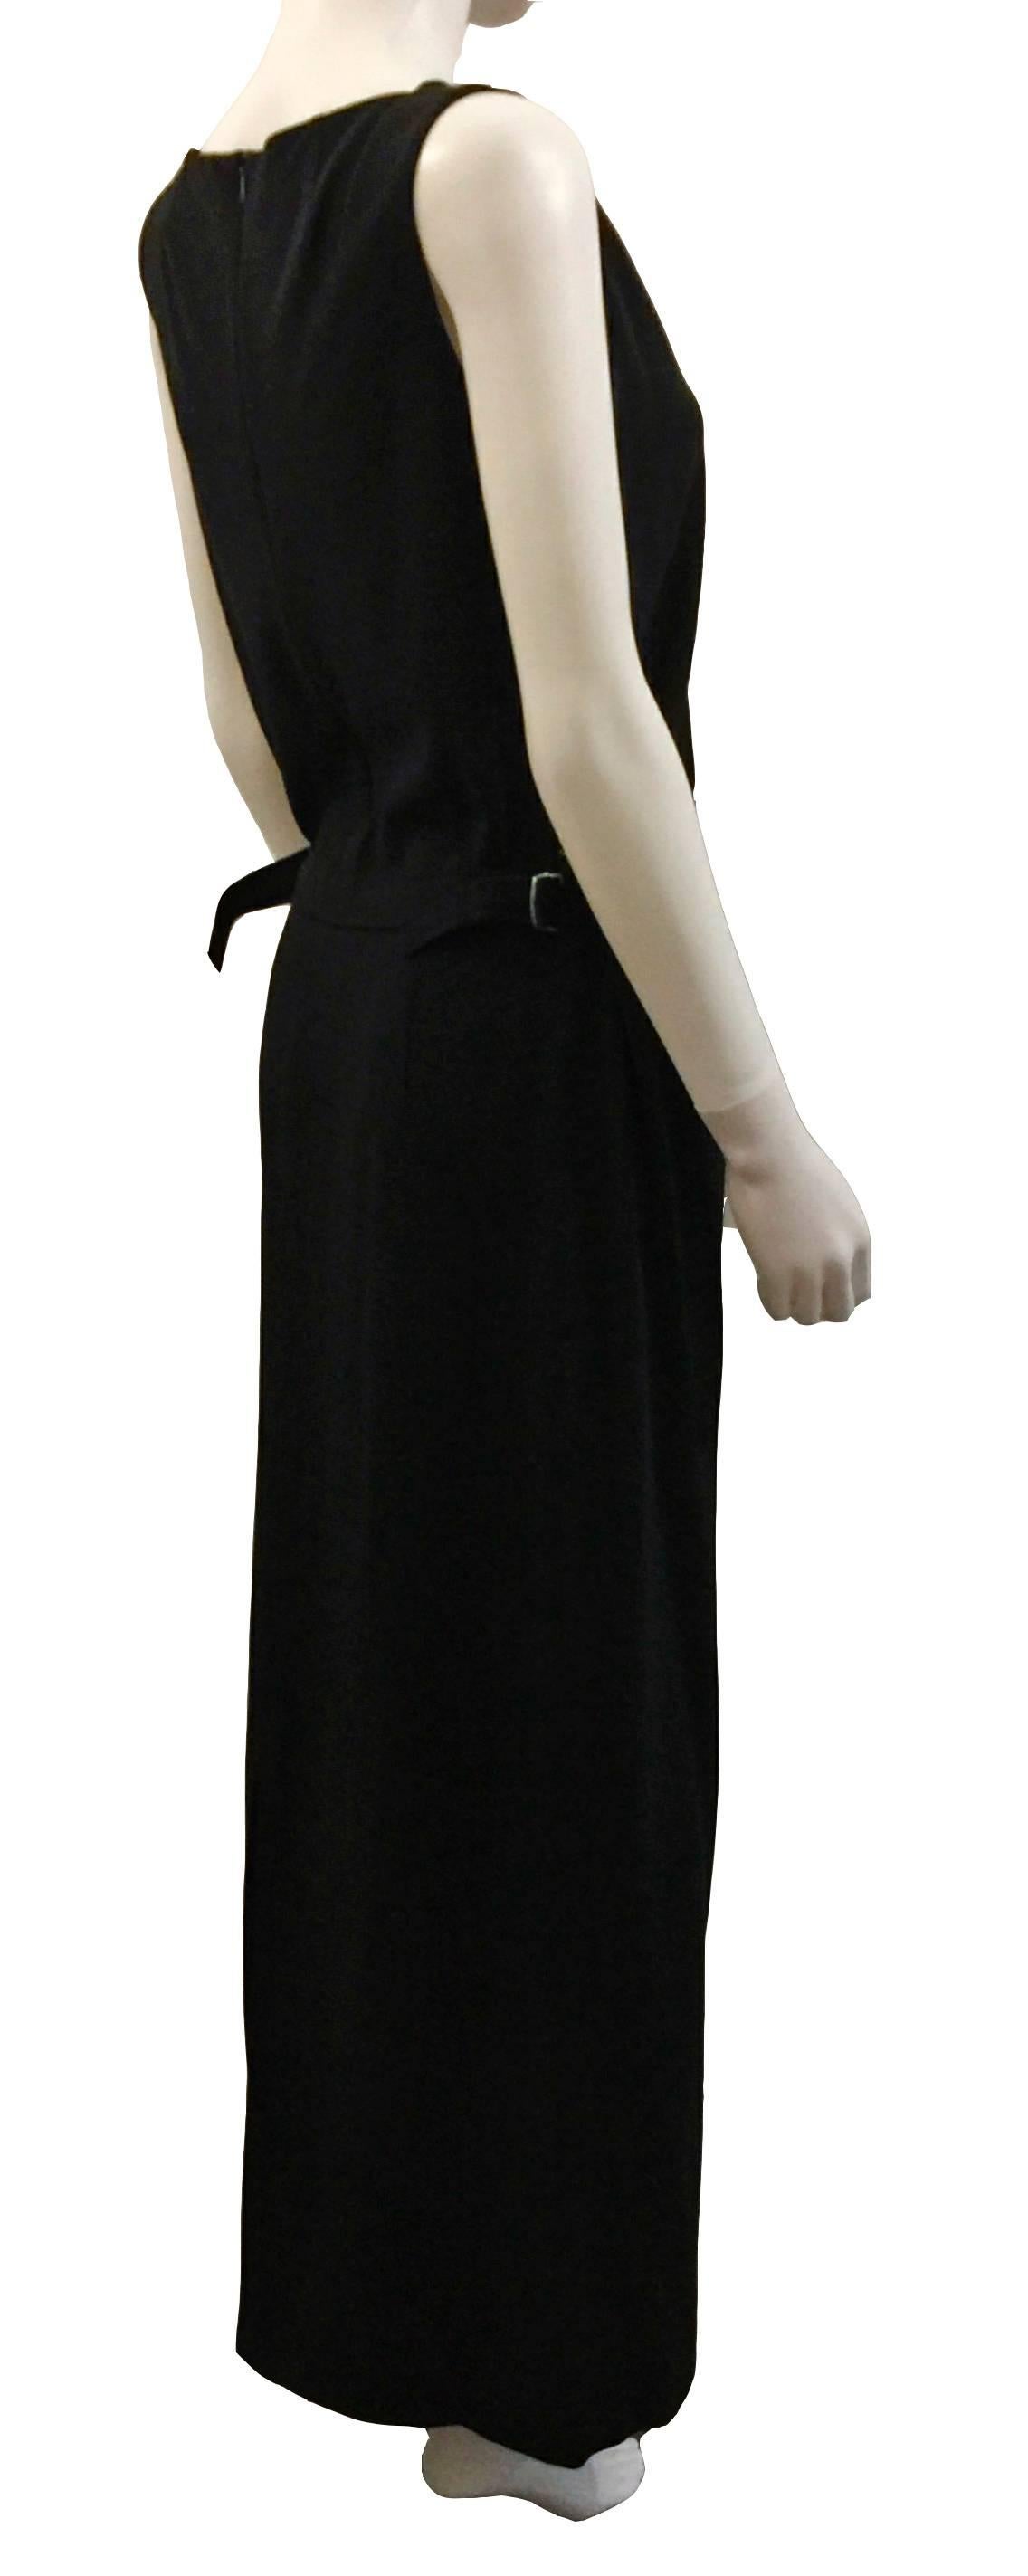 Jil Sander stylish long black dress.  Sleeveless with straight long skirt, vent on back of skirt, zipped with side adjust ties. Size EU38.  Material is a high quality 96% Fleece Wool with 4% Elastane.  Very Good Condition.  This item is guaranteed